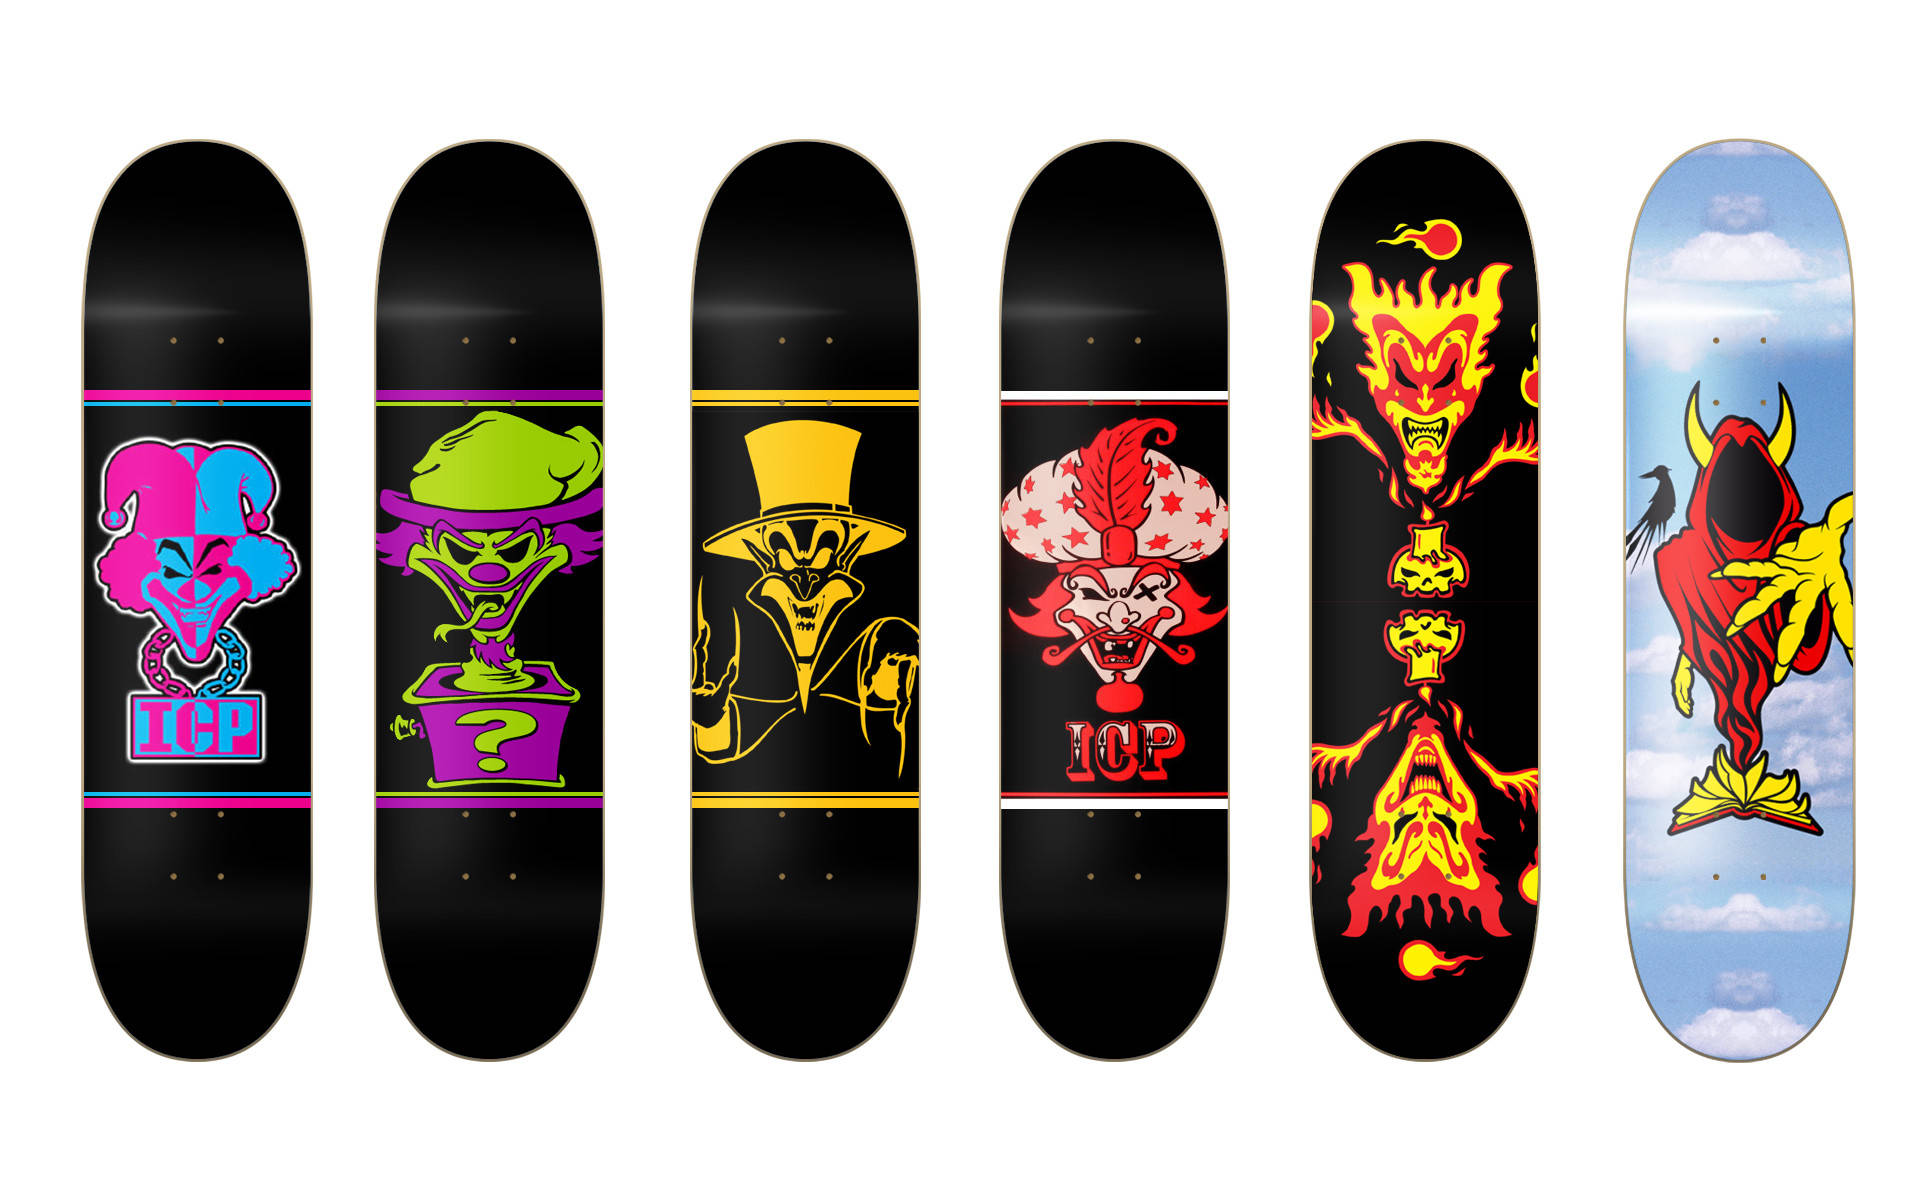 Icp And Juggalo Decks Background